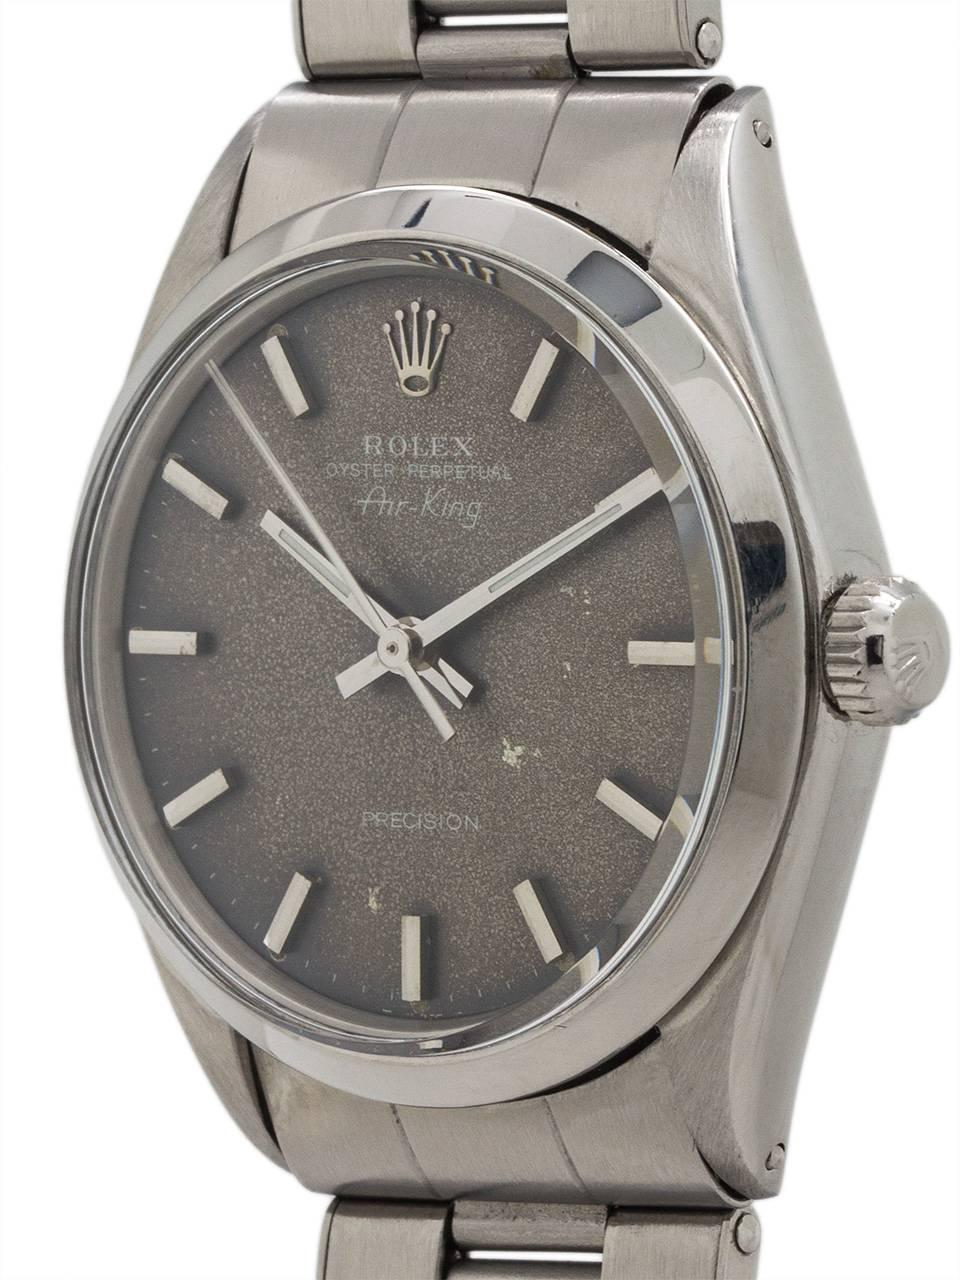 Rolex stainless steel Oyster Perpetual Airking ref 5500 serial# 2.0 million circa 1968 with distinctive distressed “tropical” dial with applied silver indexes & silvered baton hands. This 34mm diameter vintage man’s model features an original